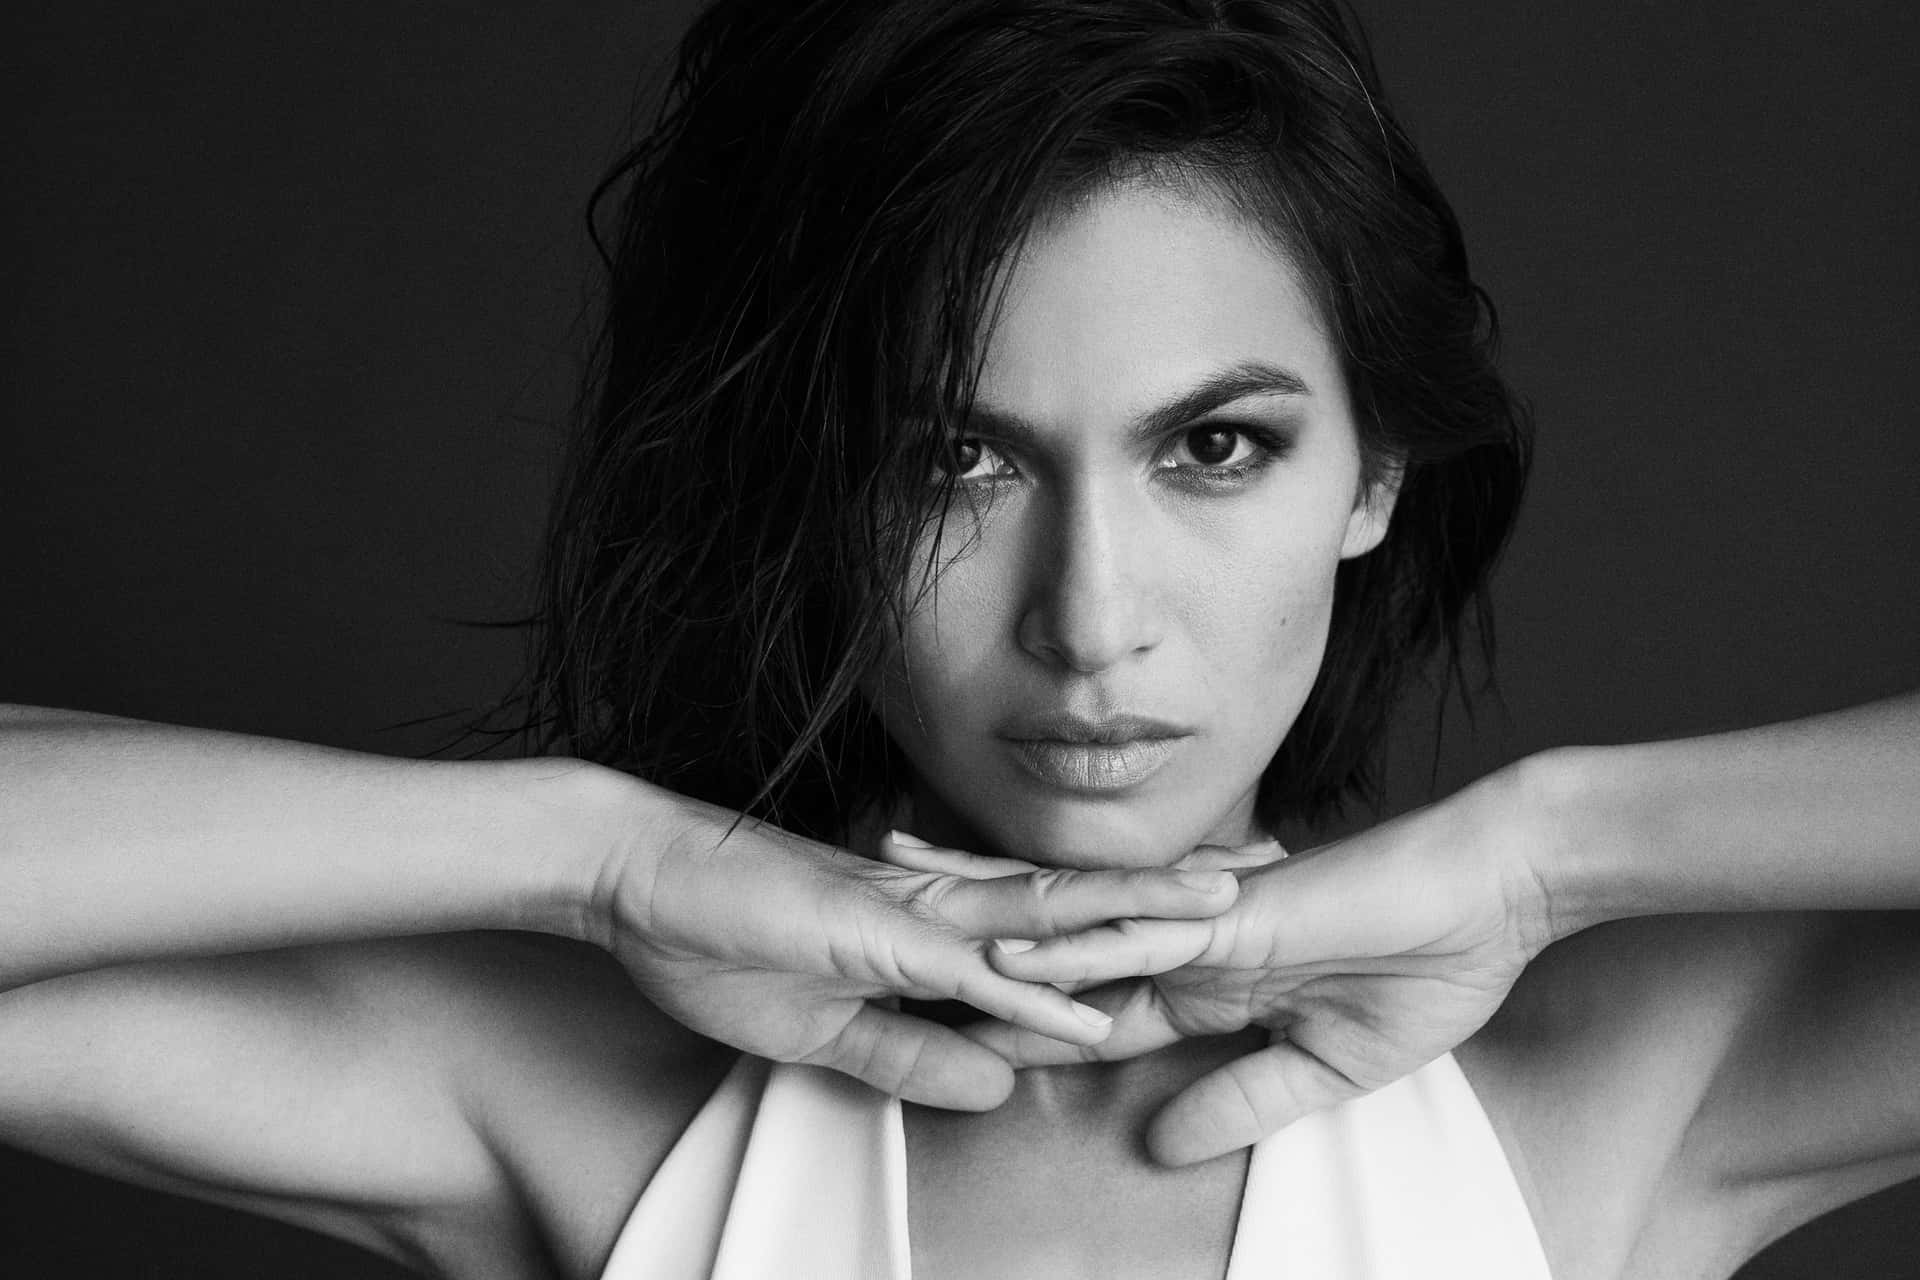 Free Elodie Yung Wallpaper Downloads, [100+] Elodie Yung Wallpapers for  FREE 